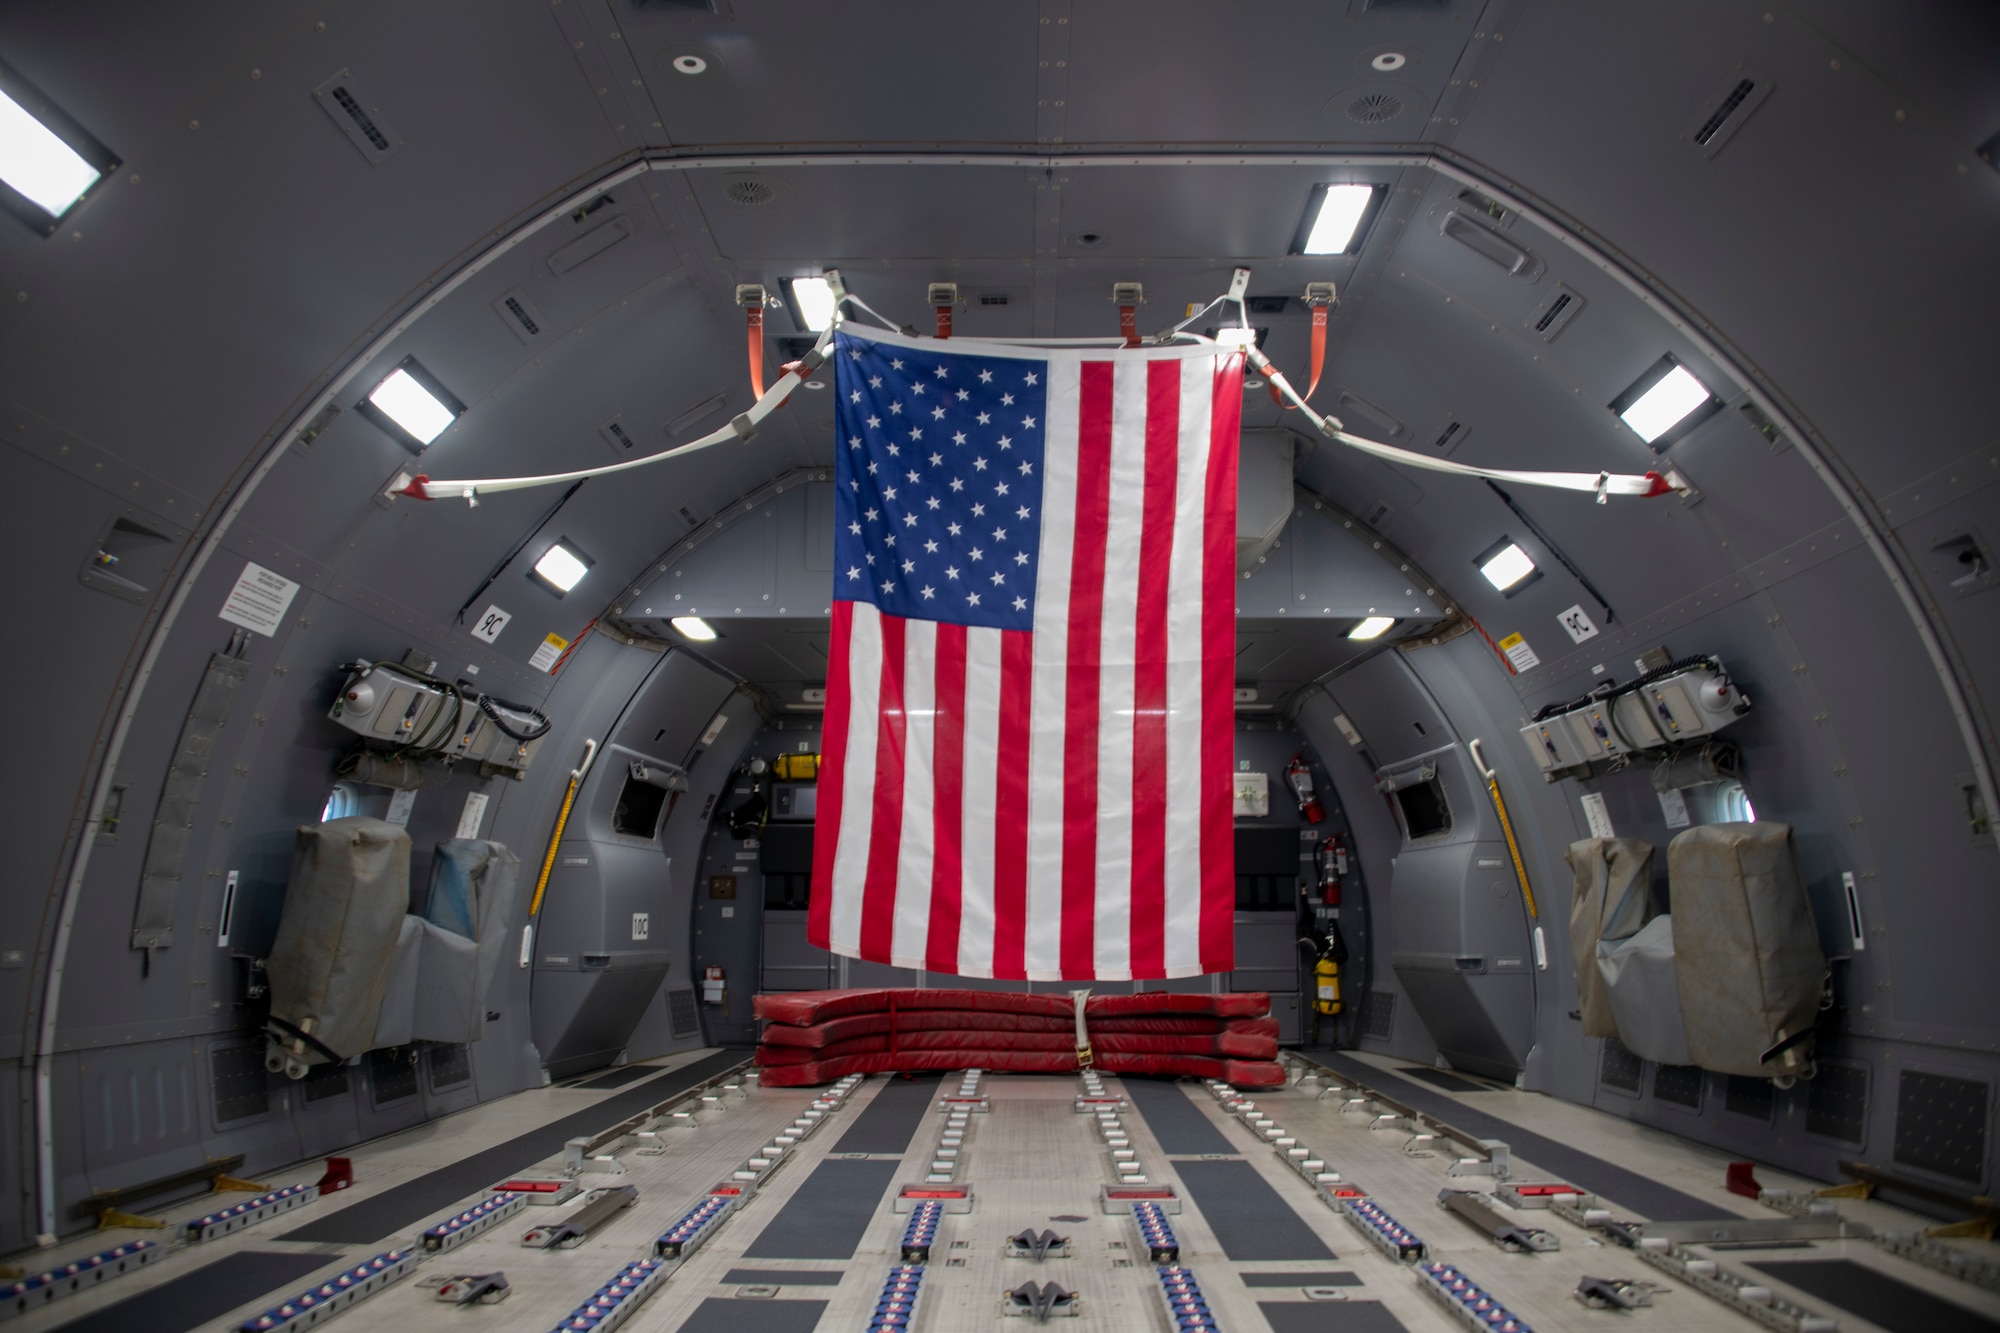 A flag is hung in the back of a KC-46 Pegasus at Altus Air Force Base, Oklahoma, Oct. 8, 2021. This flag was flown inside the aircraft for the funeral of U.S. Army Air Forces 2nd Lt. Ernest Vienneau, former 97th Bombardment Group pilot, to be later given to Veinneau’s family. (U.S. Air Force photo by Staff Sgt. Cody Dowell)